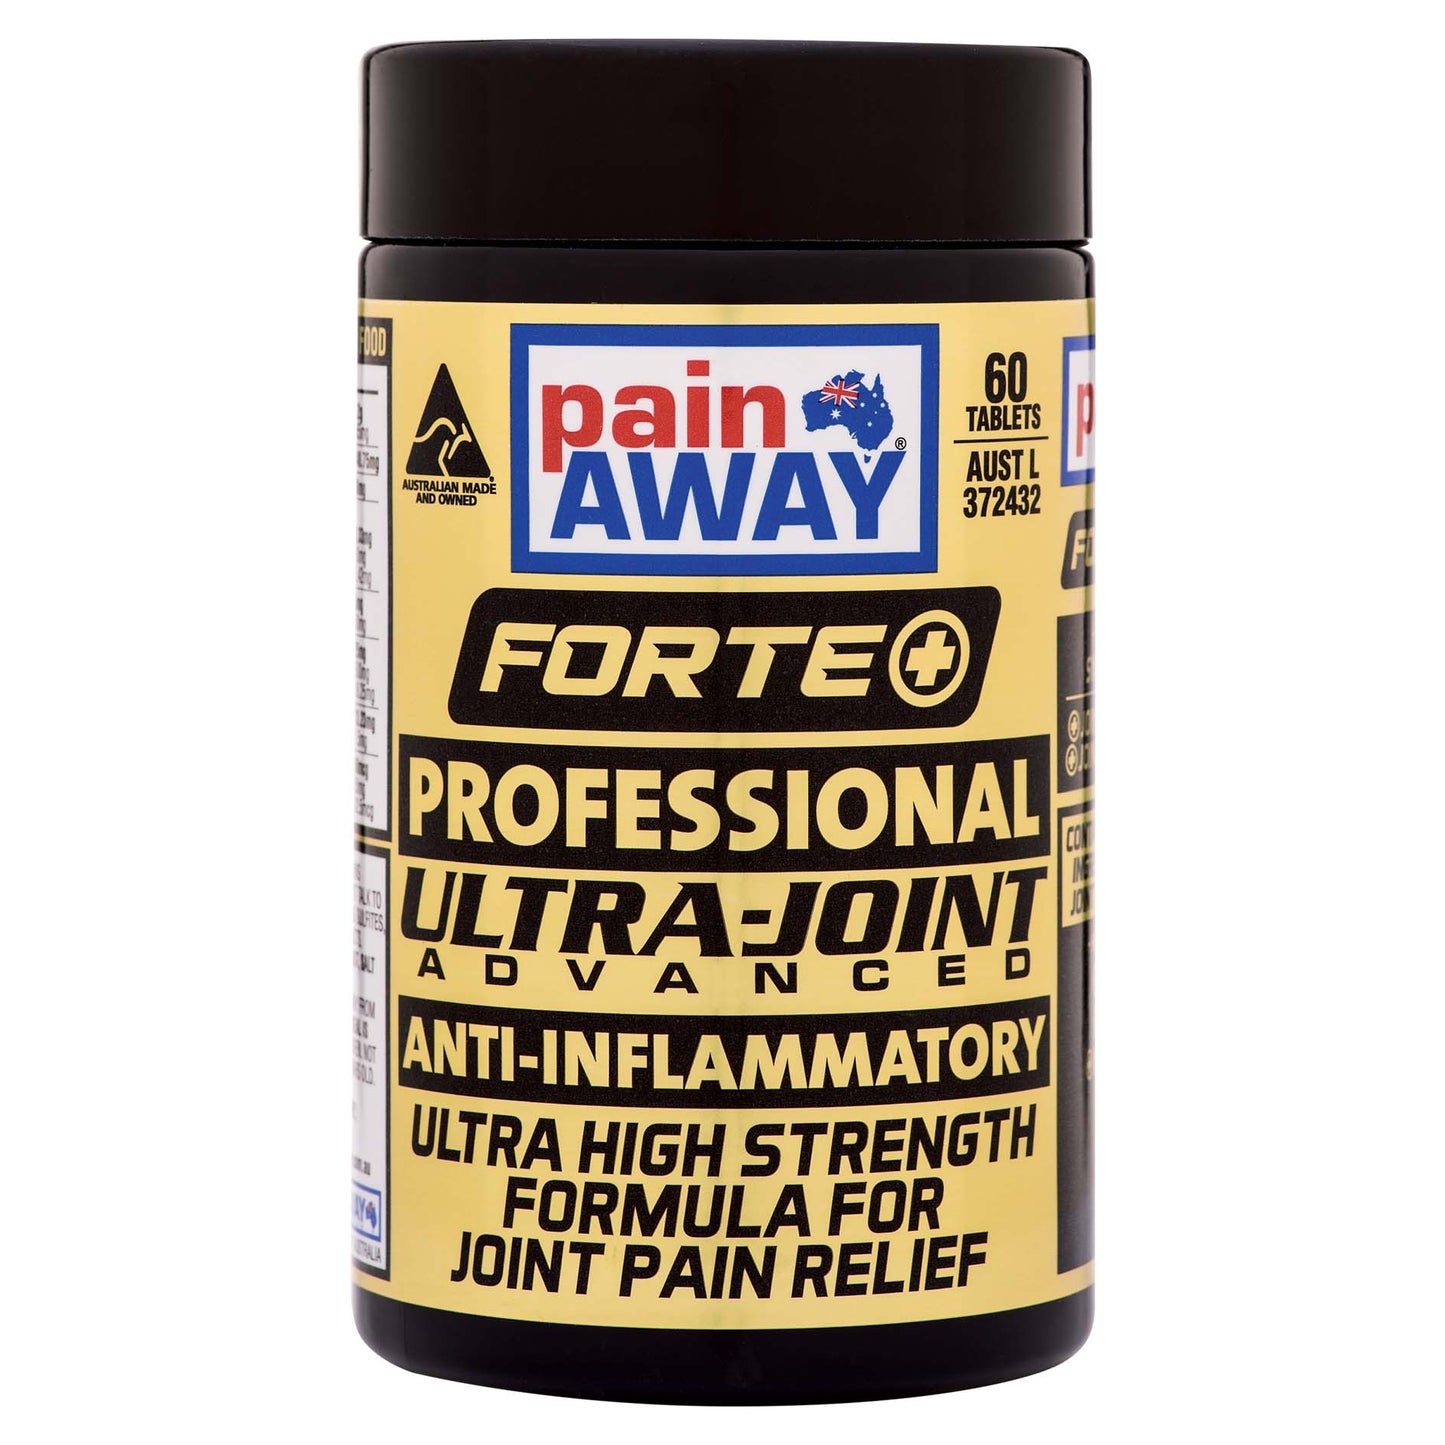 PAIN AWAY FORTE+ PROFESSIONAL, ULTRA JOINT ADVANCED TABLETS 60 EXP(05/2024)